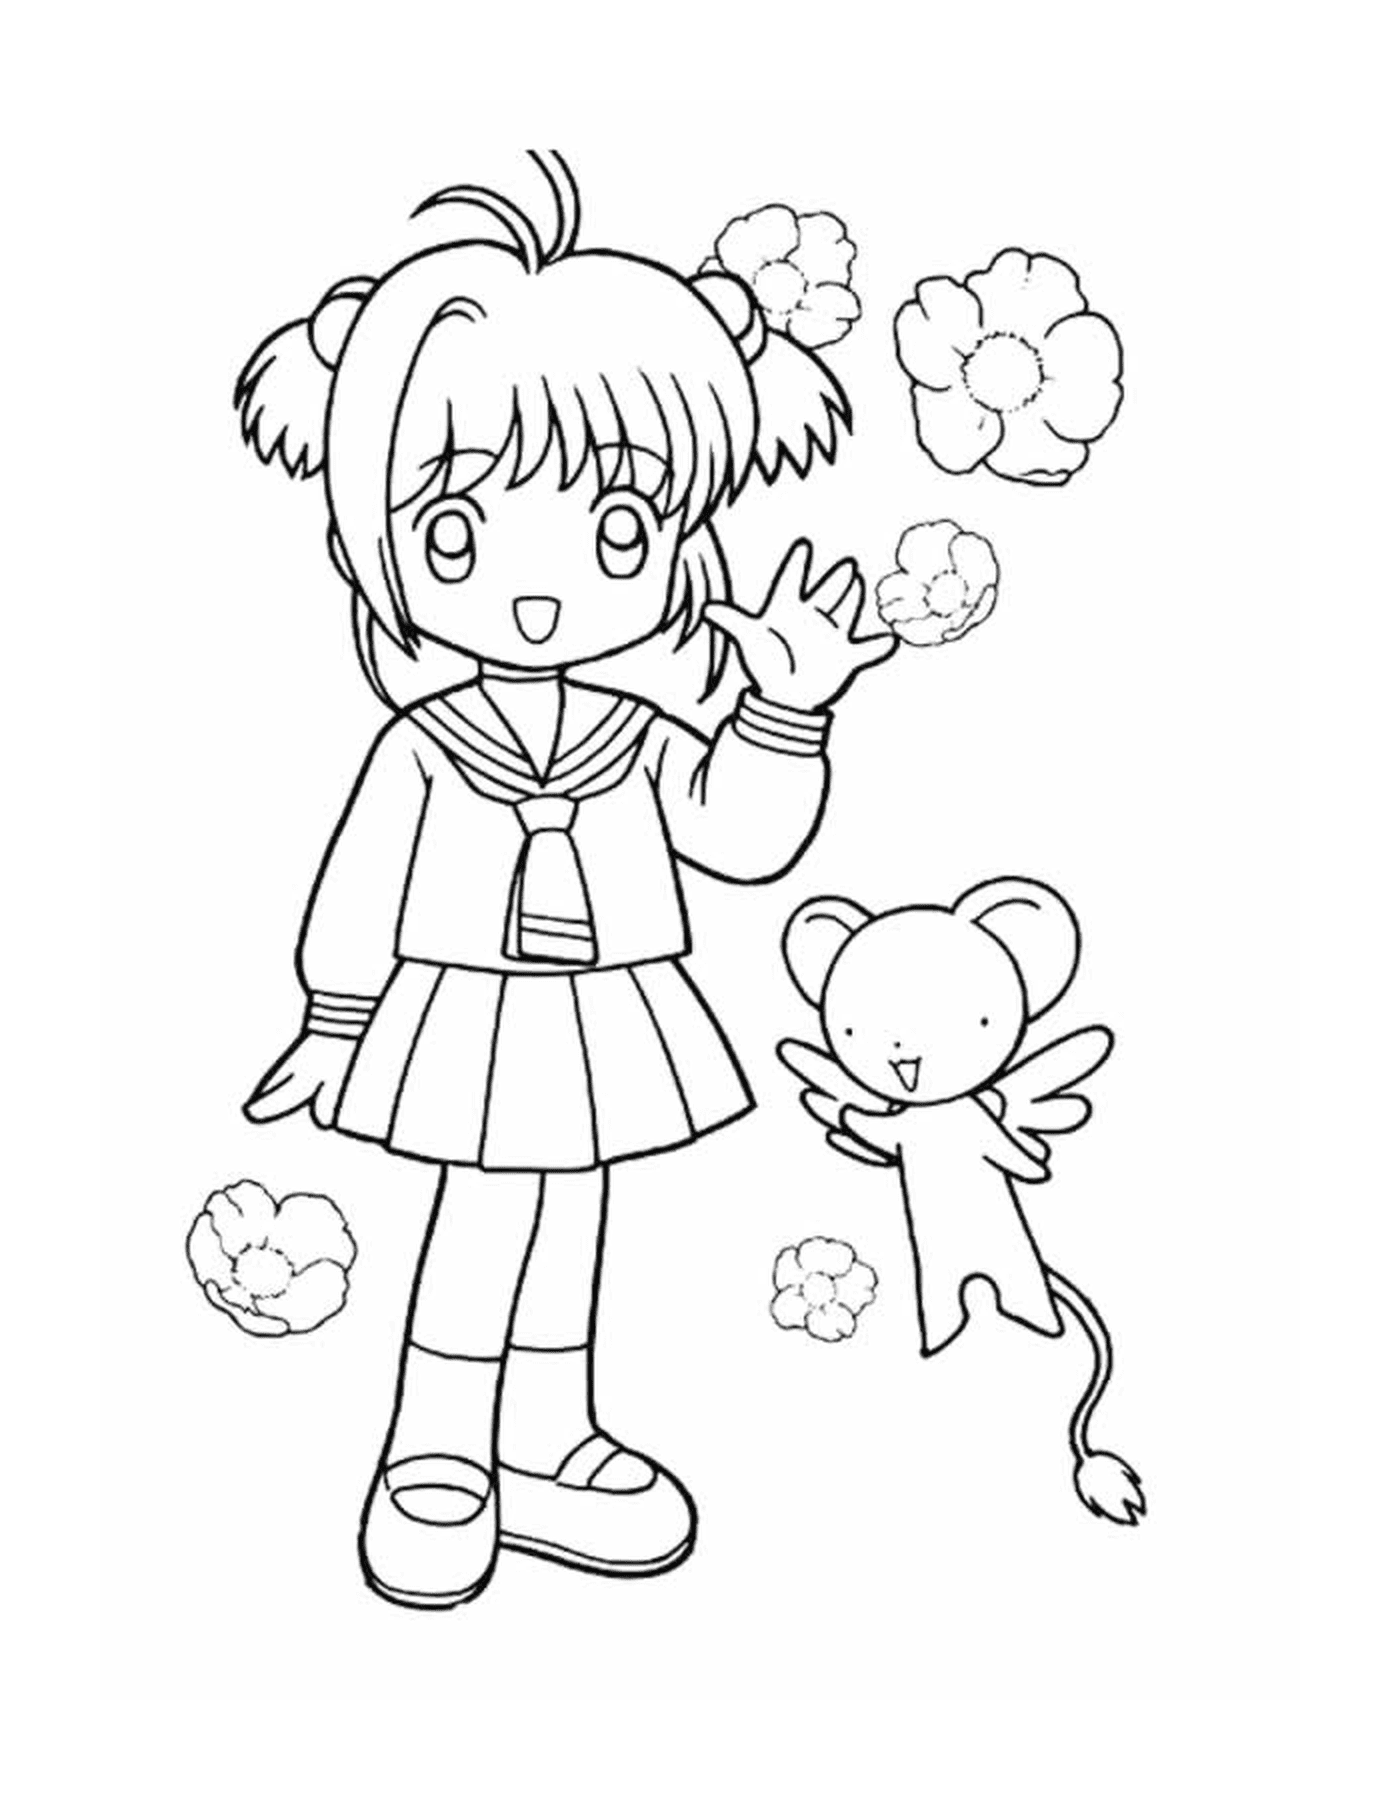  A girl and a mouse 